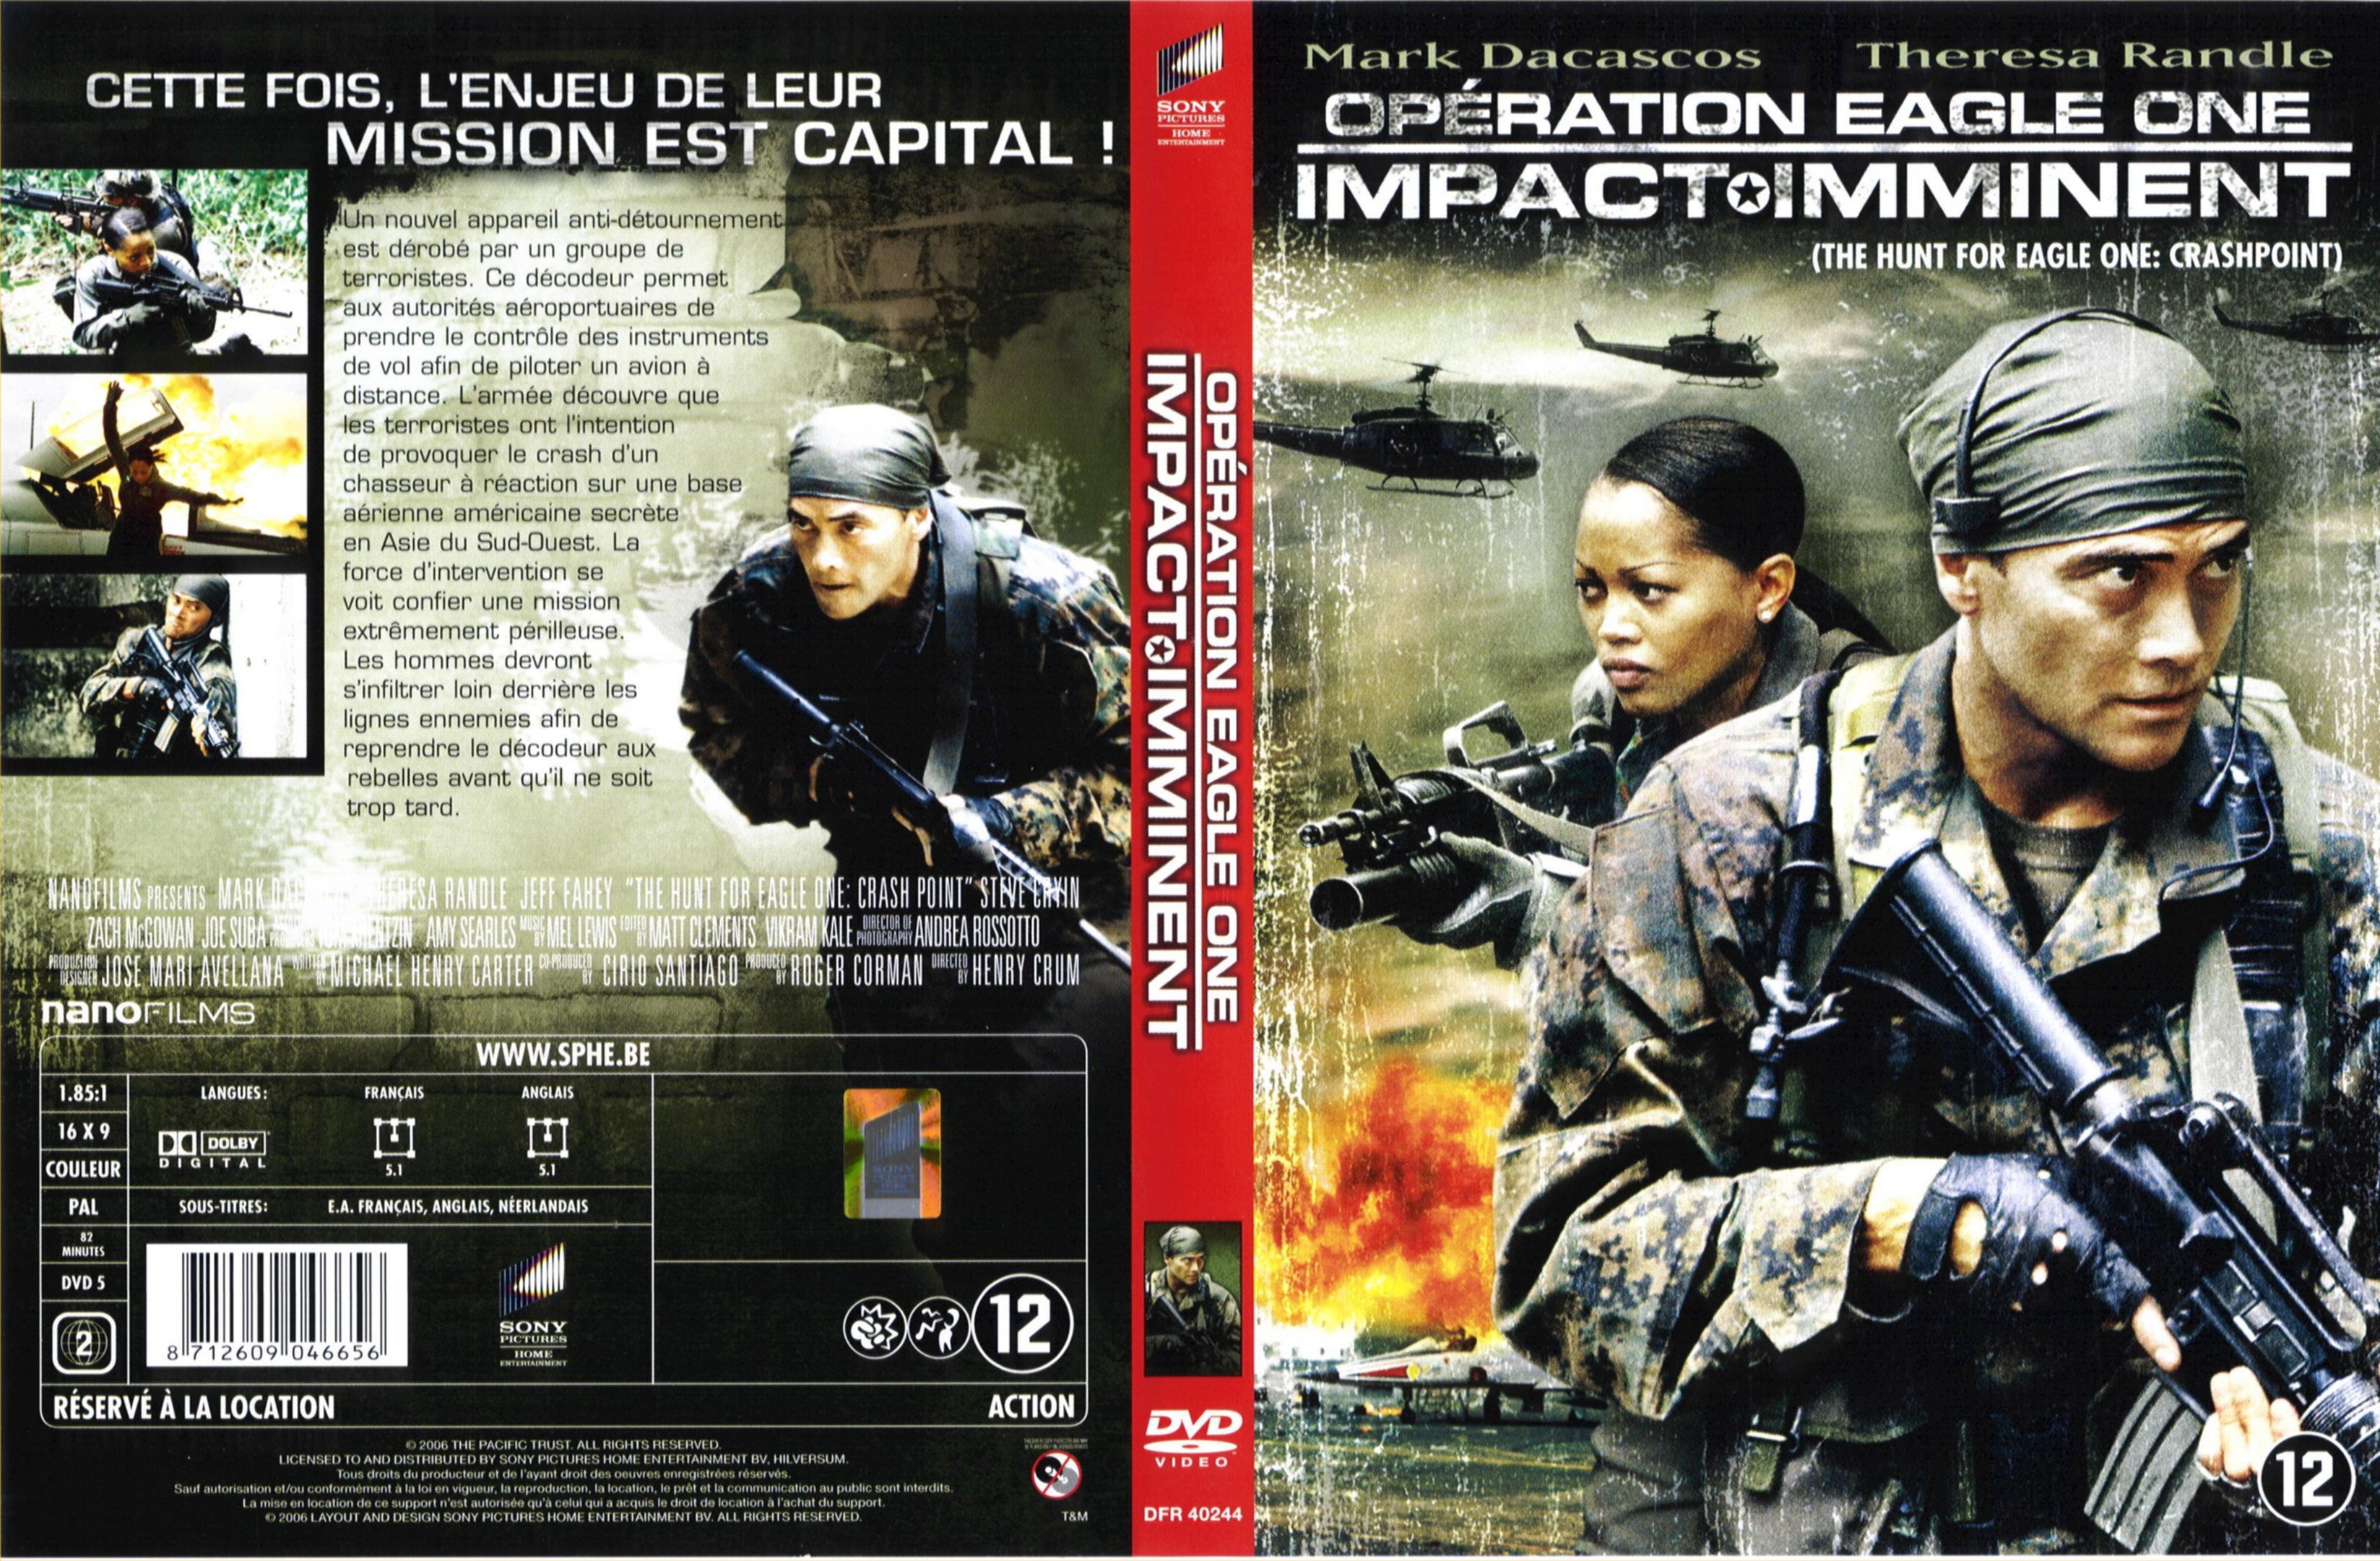 Jaquette DVD Operation eagle one - impact imminent